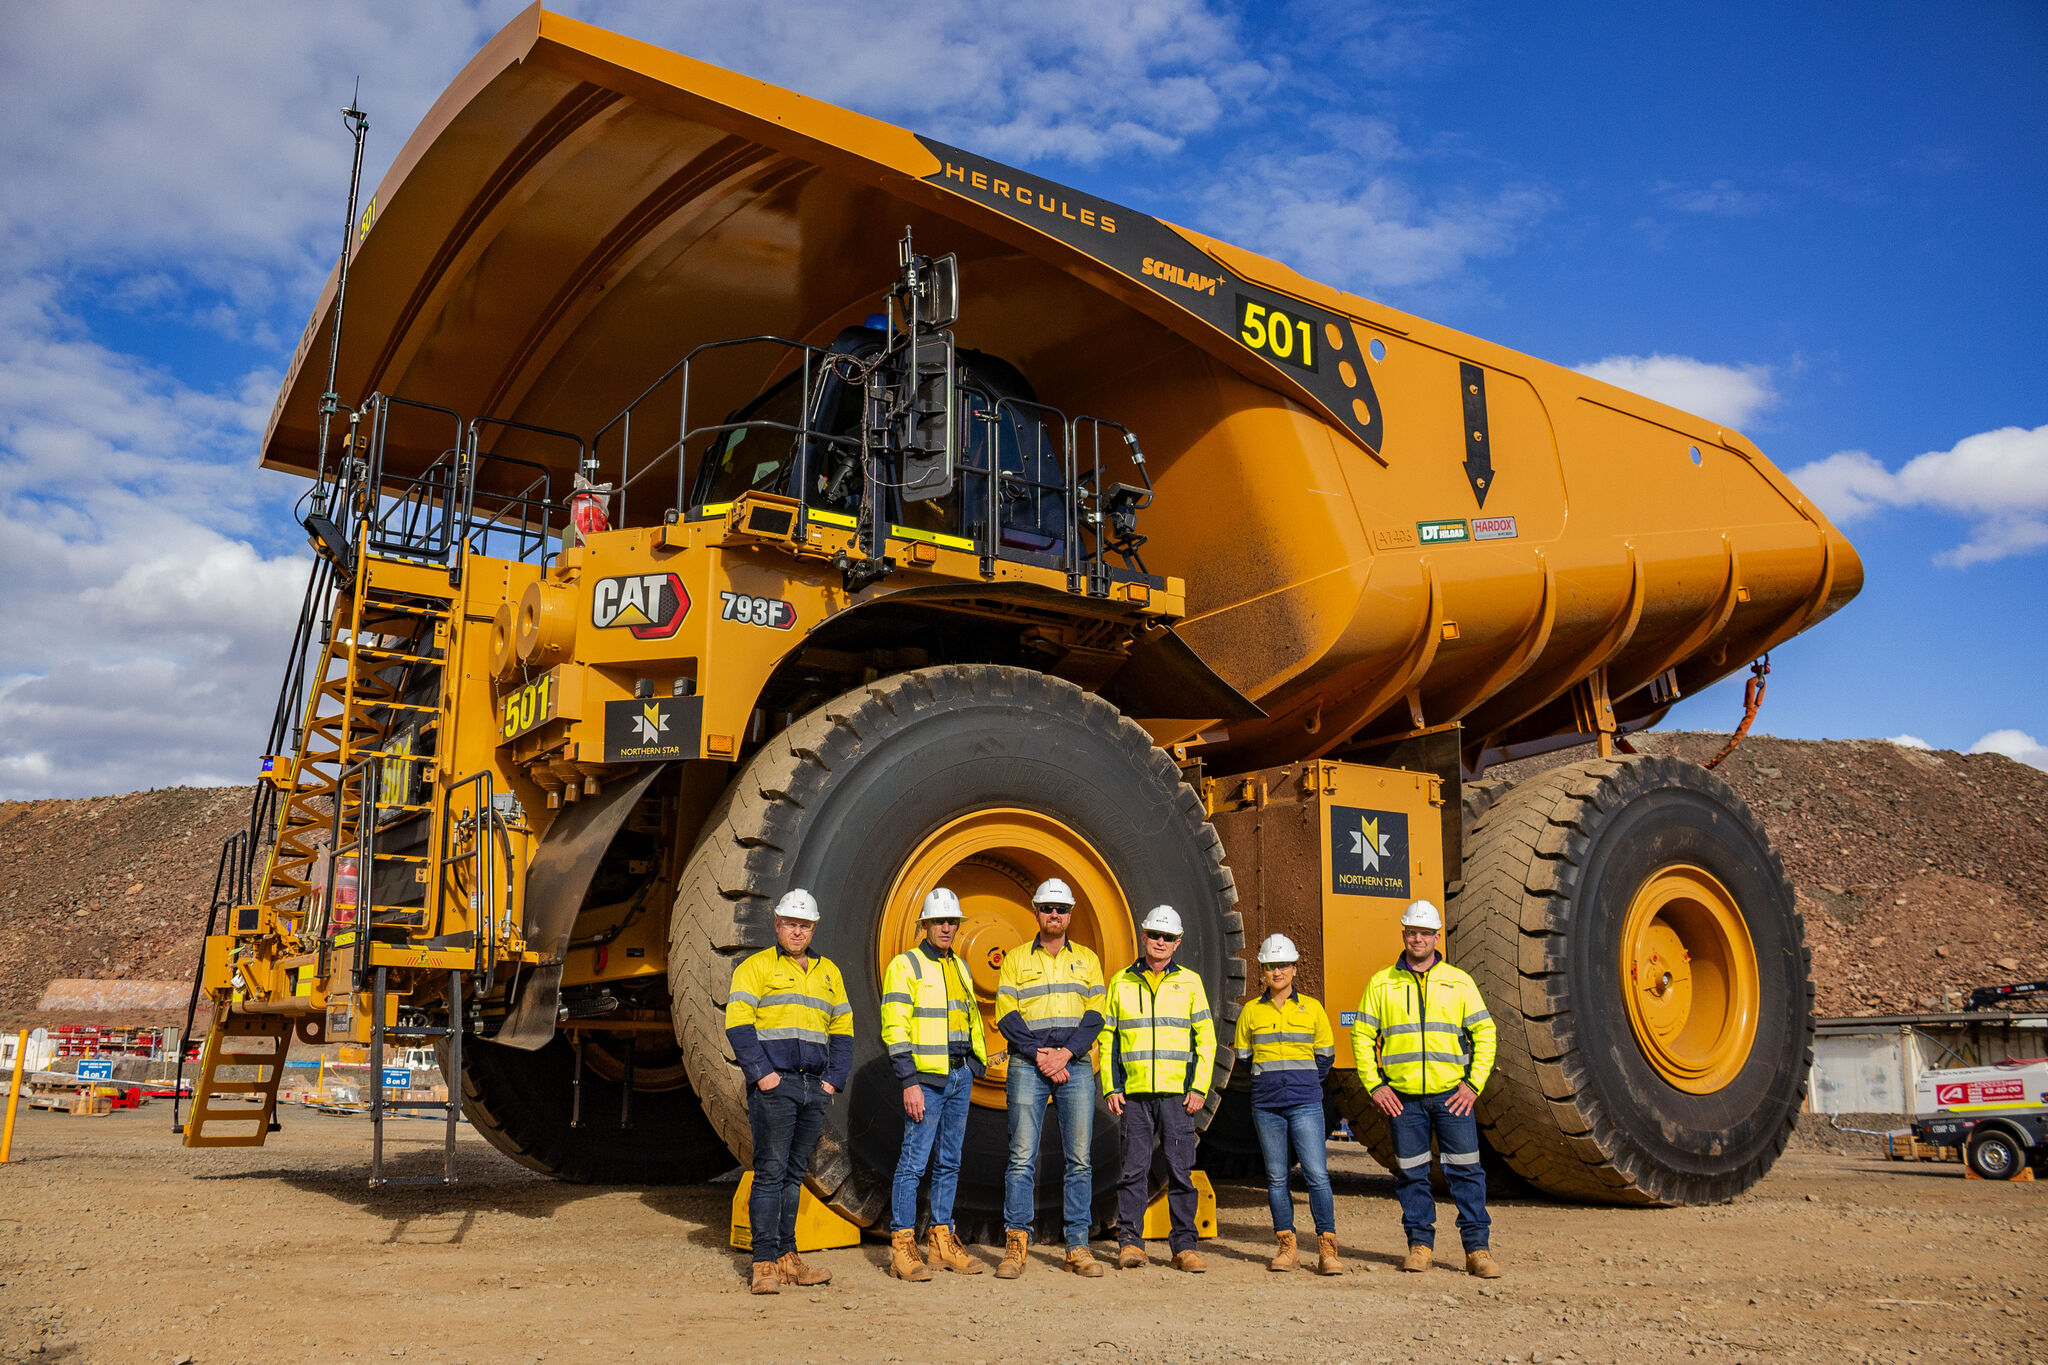 New Cat 793Fs start arriving at KCGM’s Super Pit gold operations in